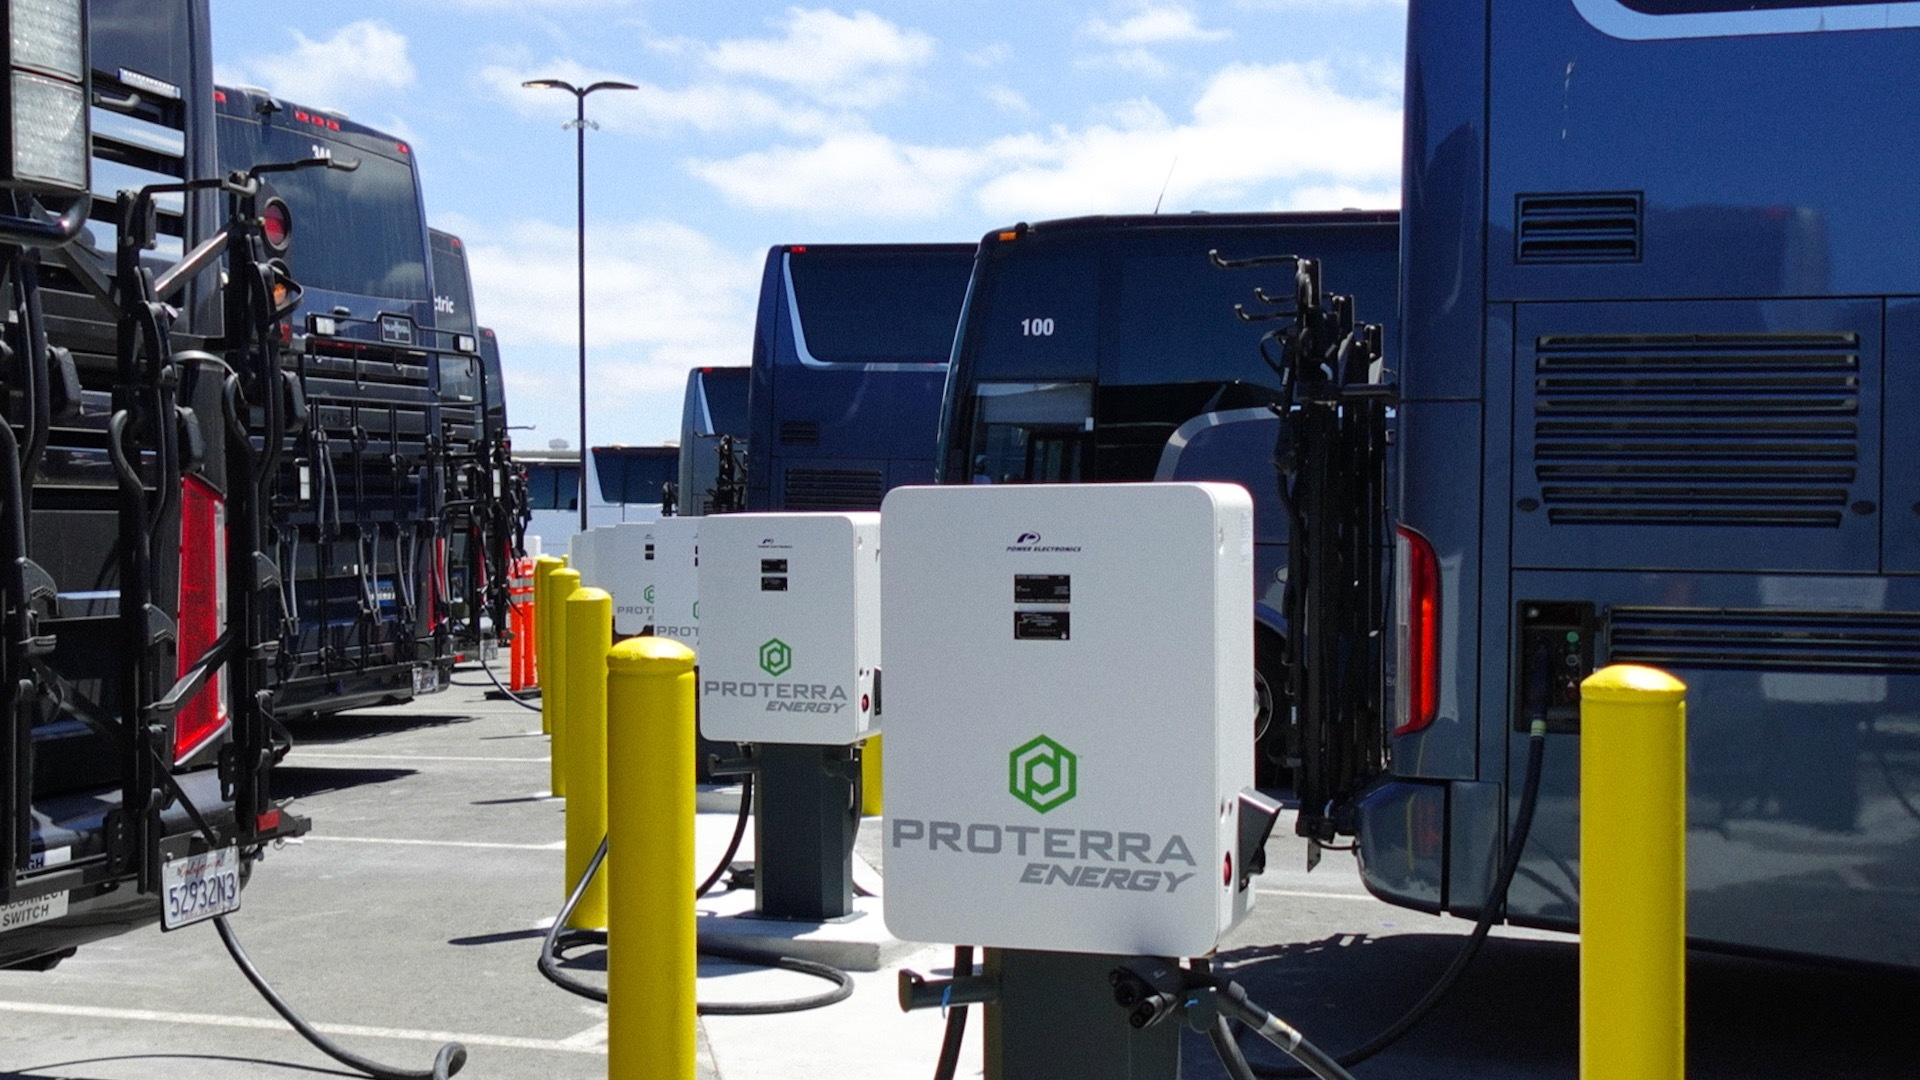 Proterra charging site for electric buses in Newark, California